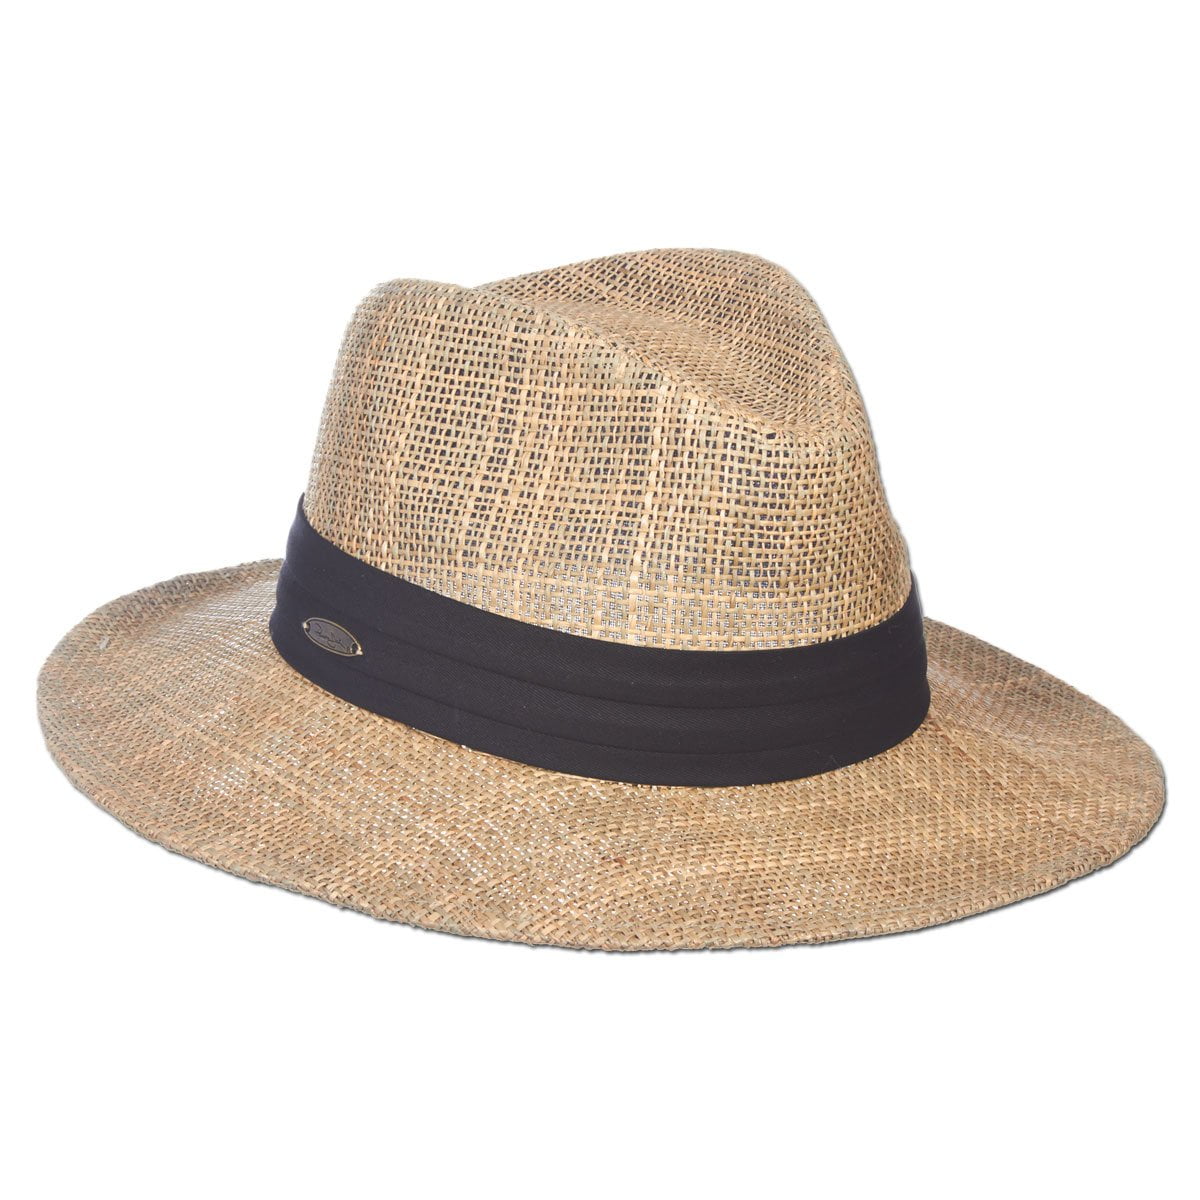 Panama Jack Dos Sombras Matte Seagrass Straw Safari Sun Hat with 3